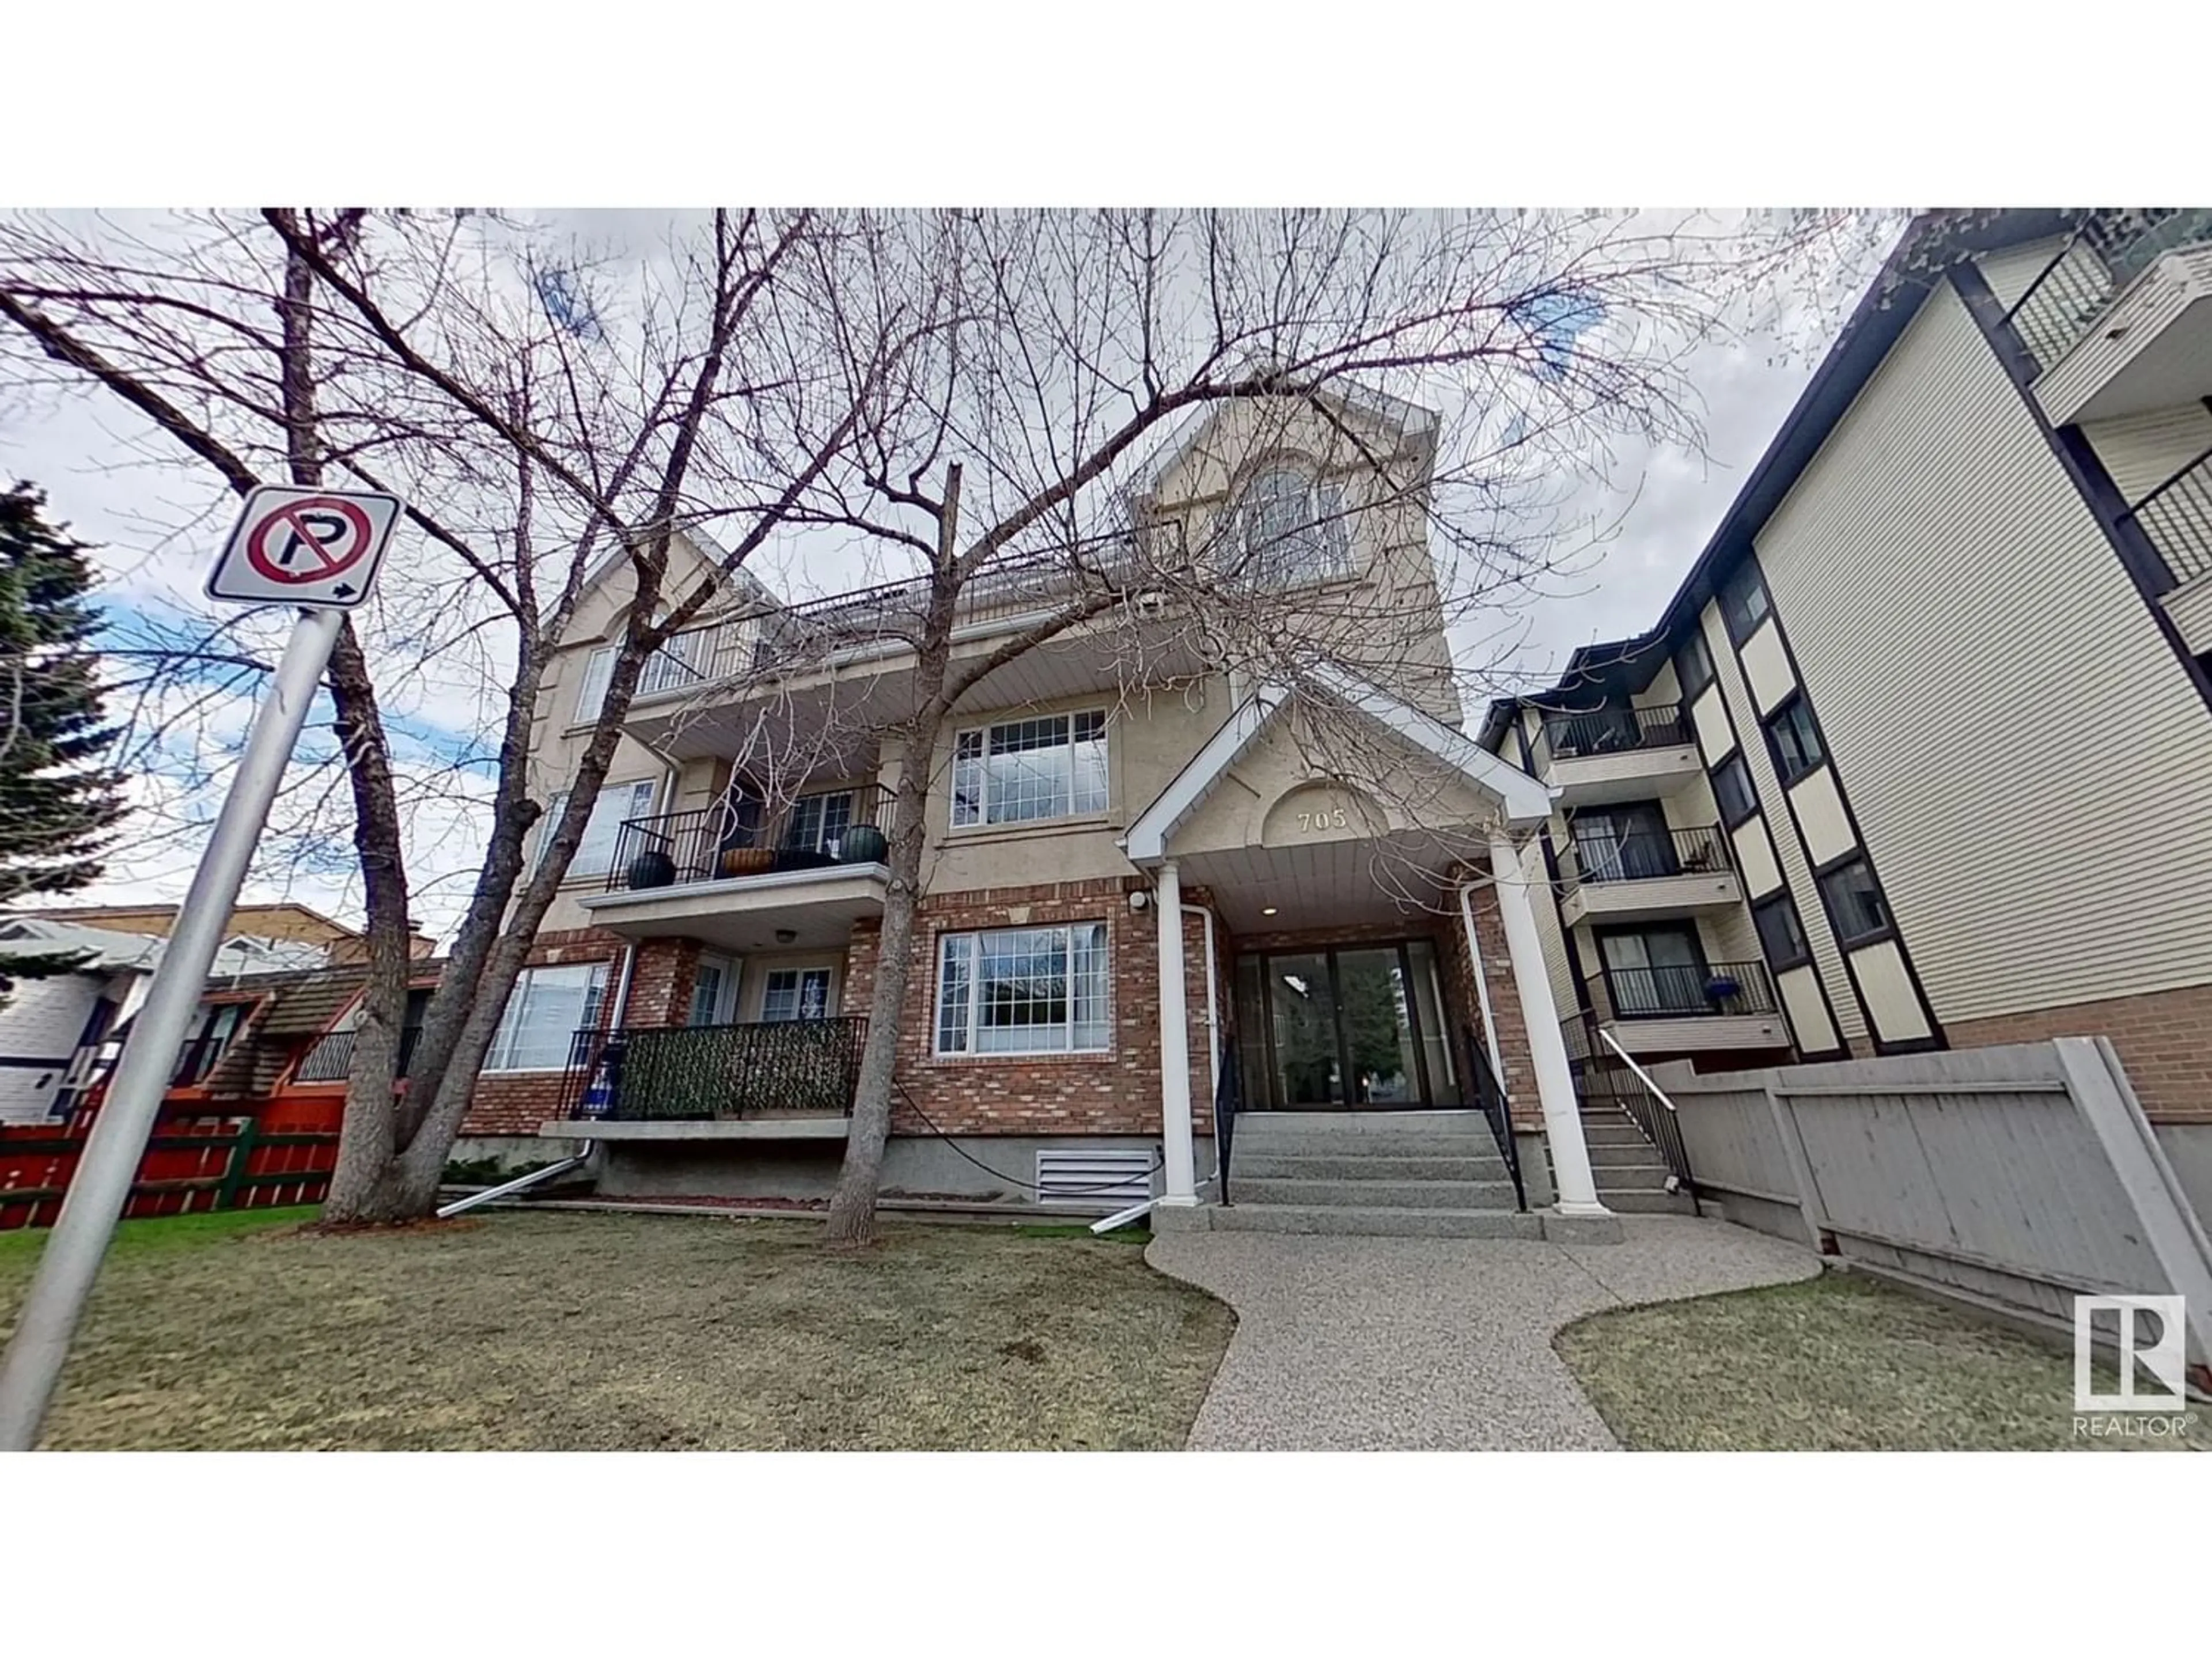 A pic from exterior of the house or condo for #301 705 56 AV, Calgary Alberta T2V0G9